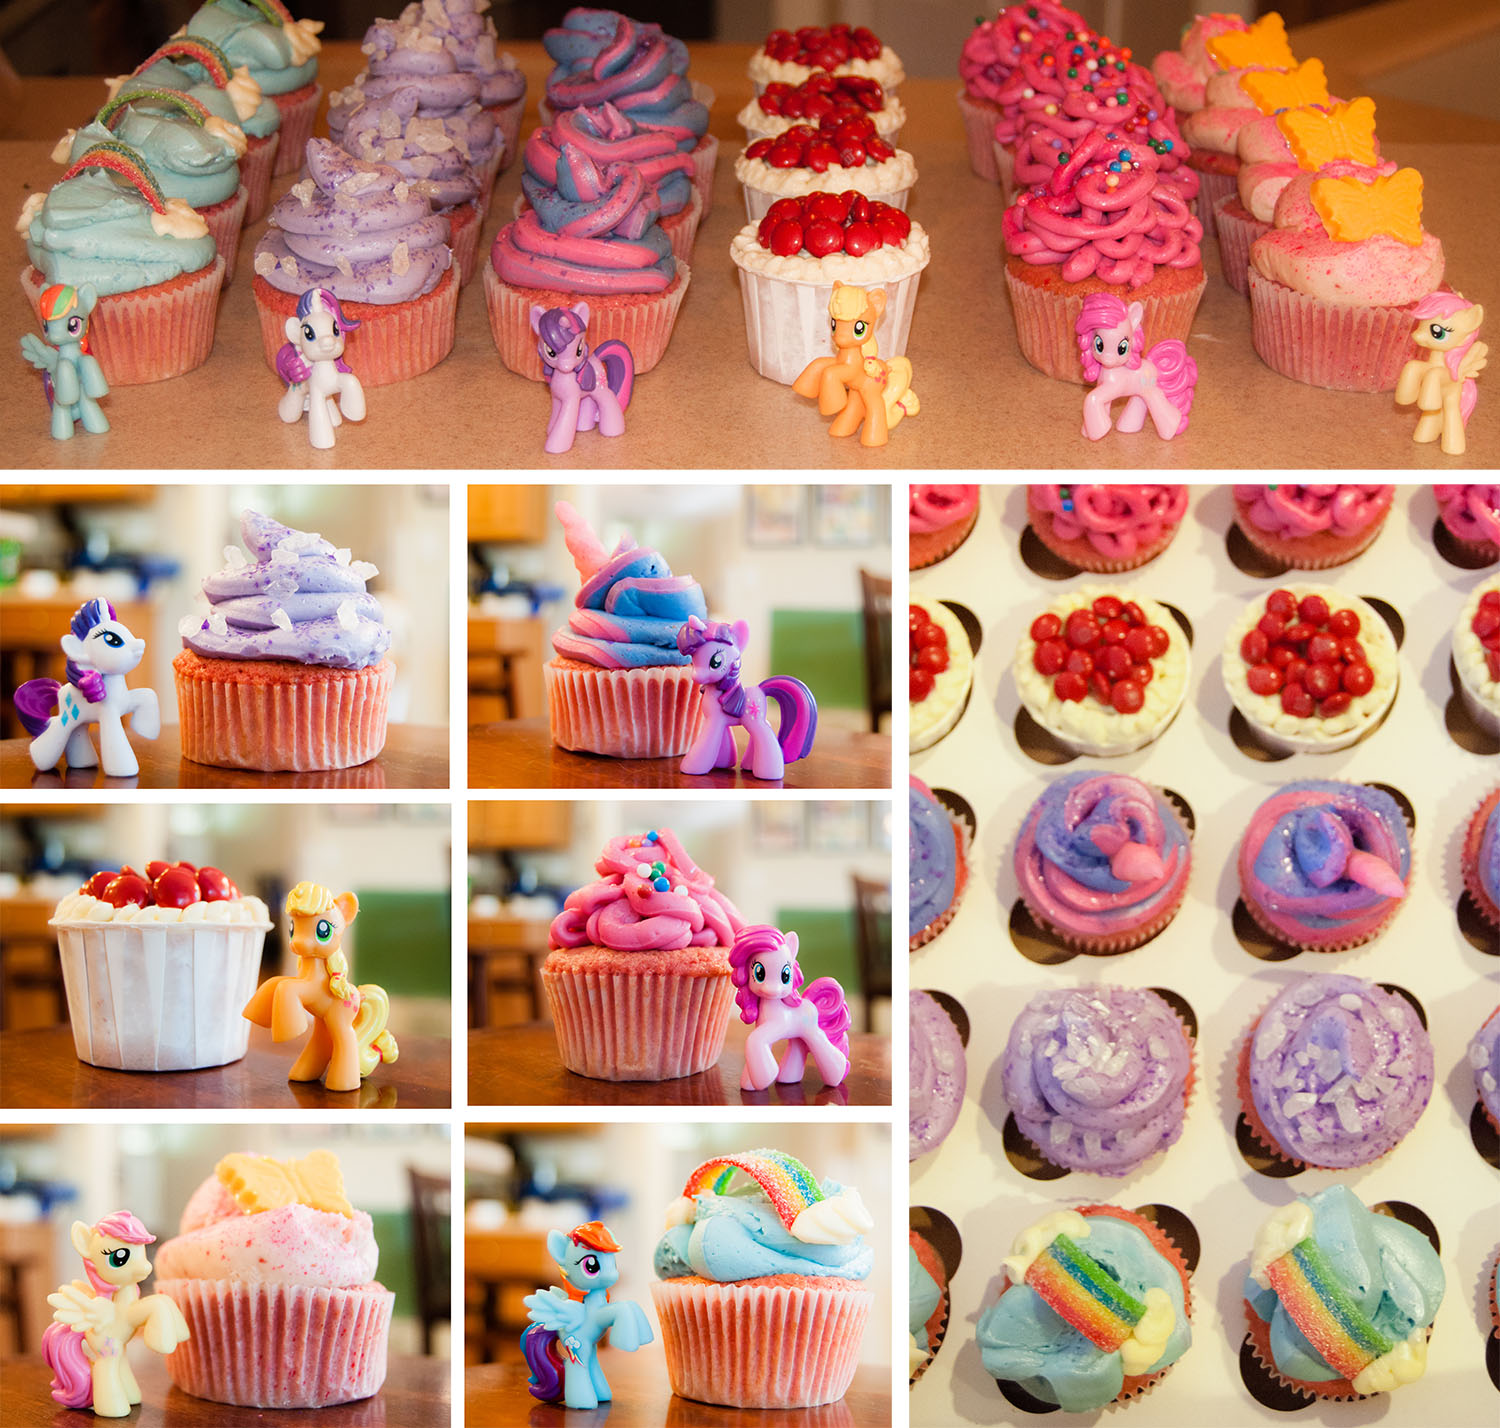 My Little Pony Cupcakes | The Majestic Vision Wedding Planning | Birthday Party in Palm Beach, FL | www.themajesticvision.com